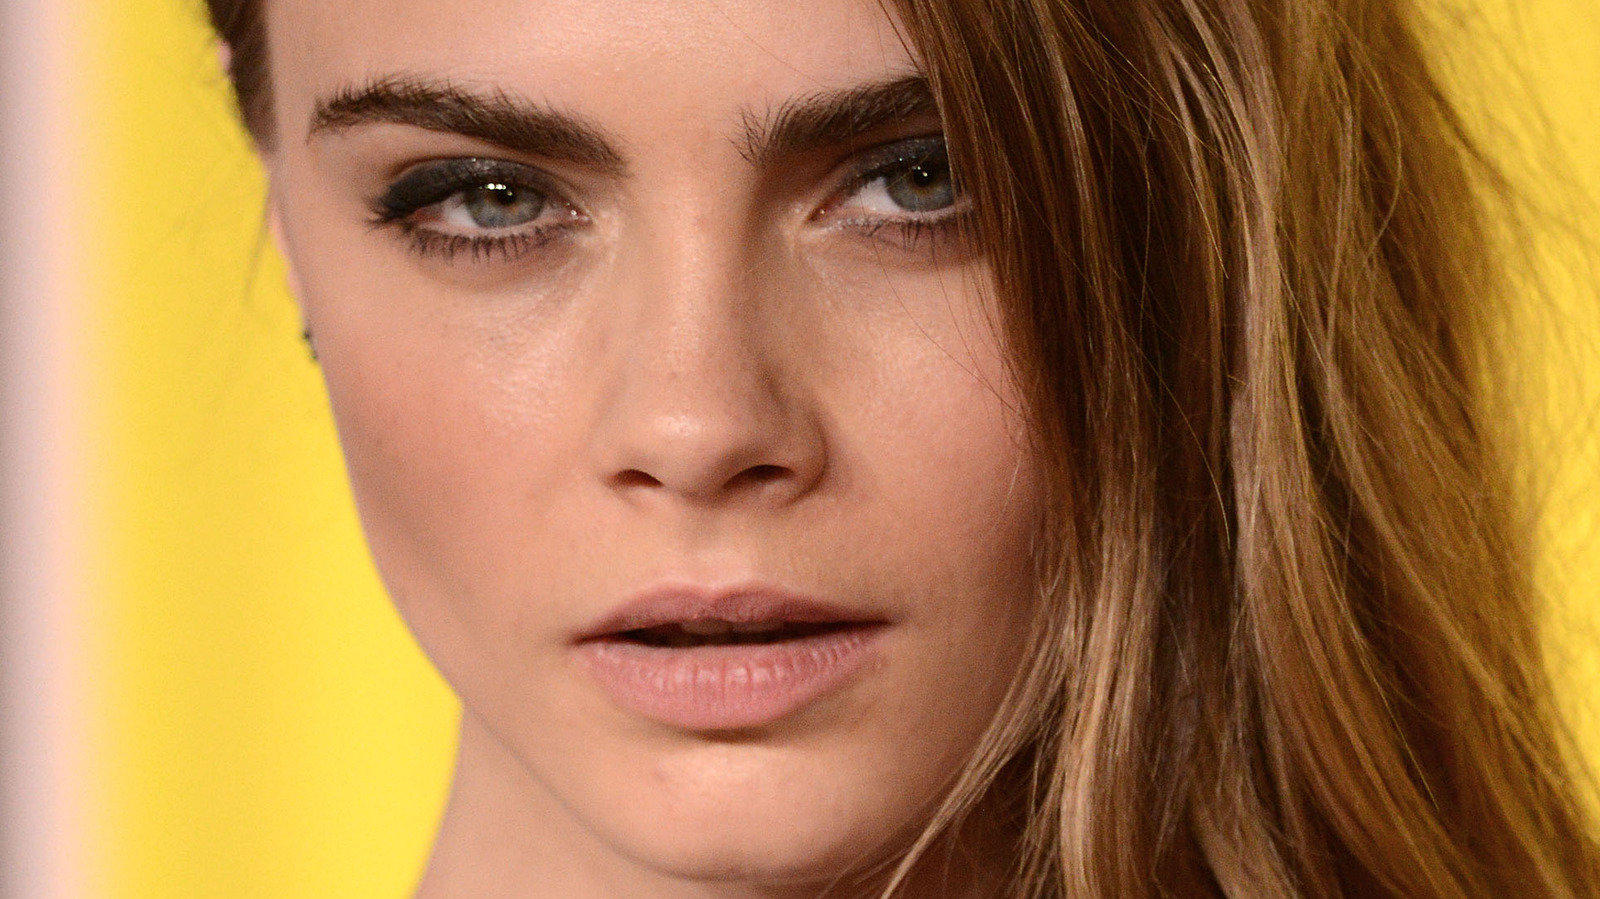 Fast Facts About Cara Delevingne